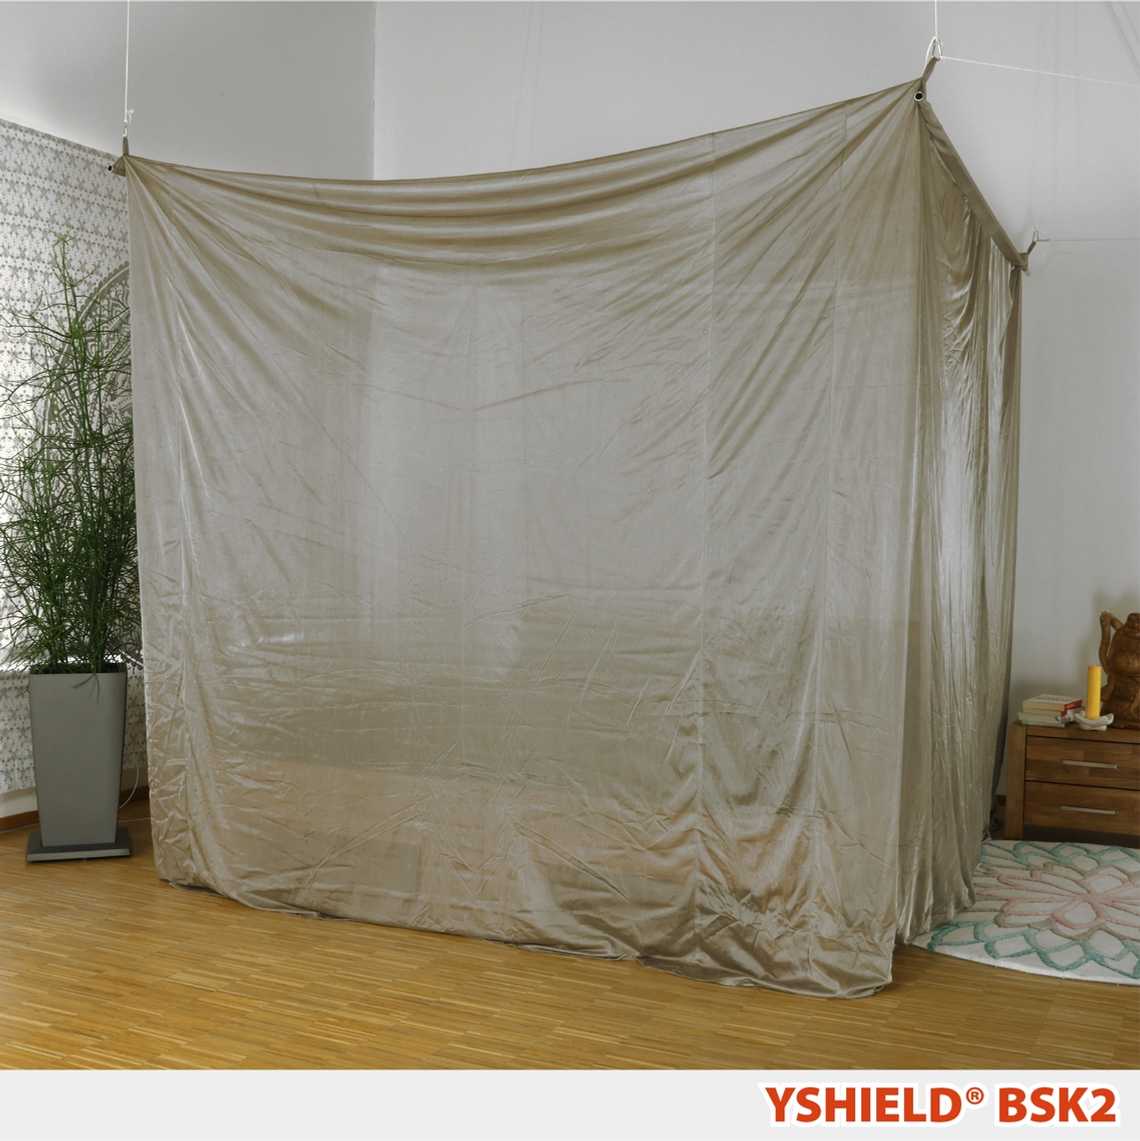 YSHIELD® BSK2 | SAFECAVE Shielding canopy | Box double bed